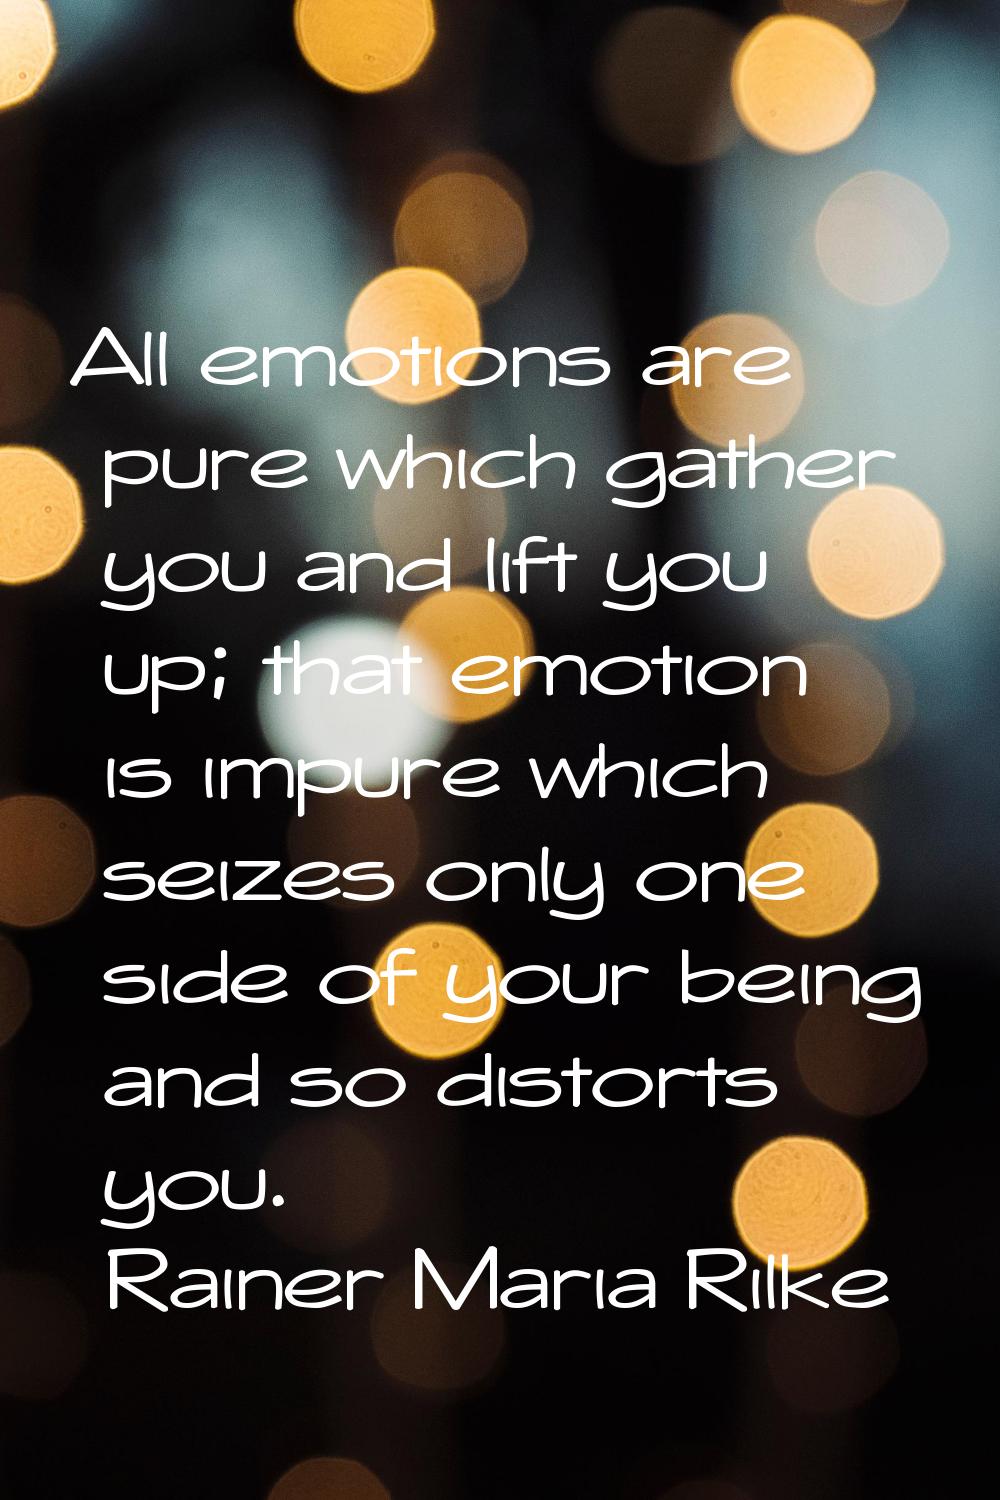 All emotions are pure which gather you and lift you up; that emotion is impure which seizes only on